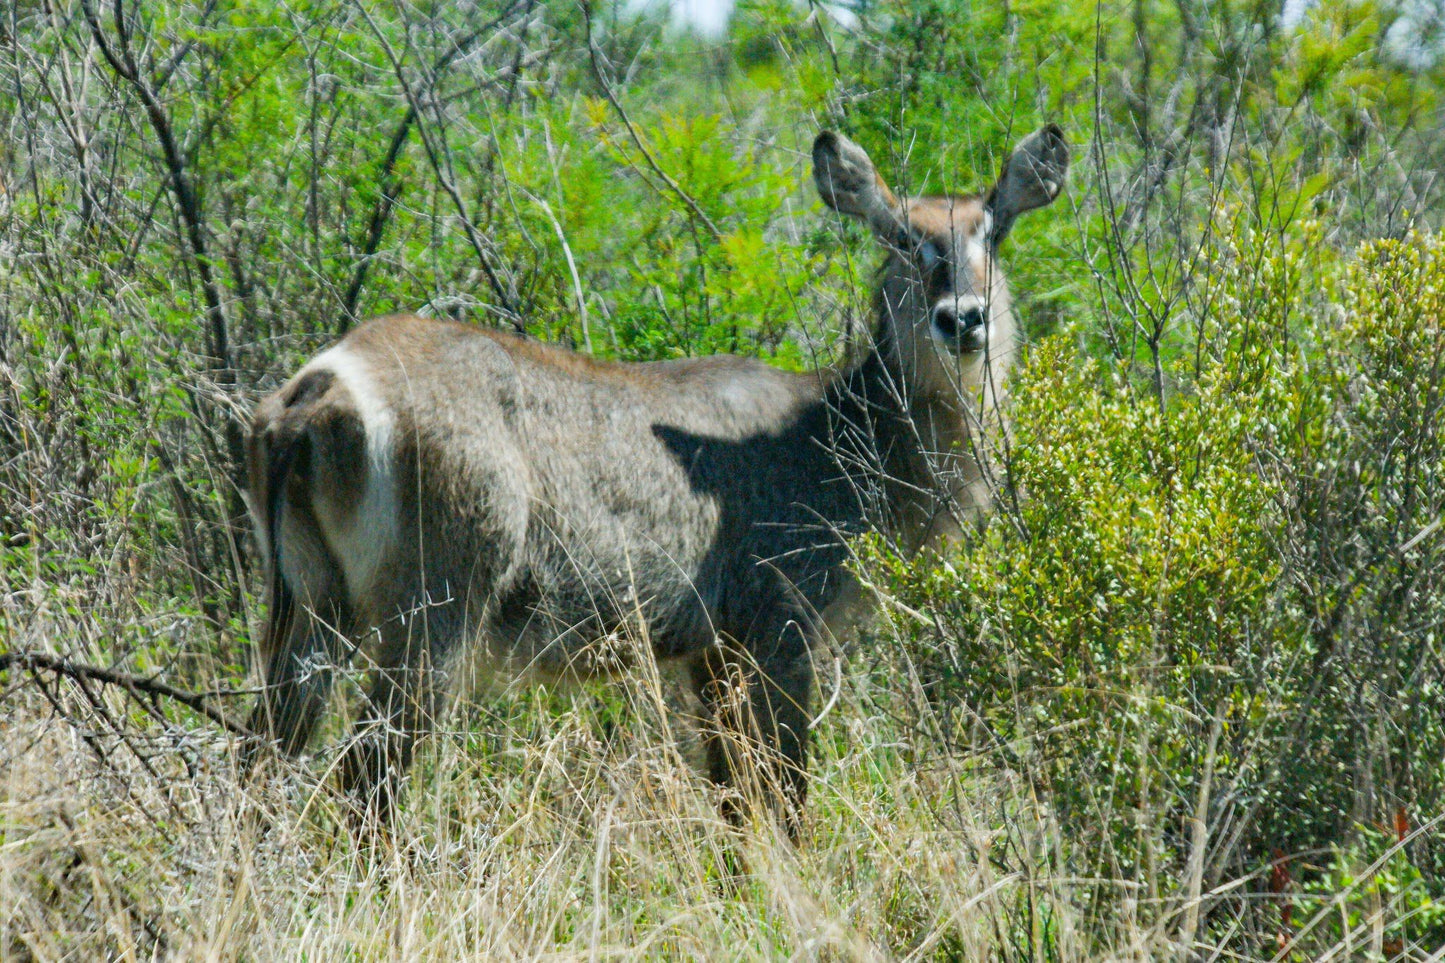  Dinokeng Game Reserve